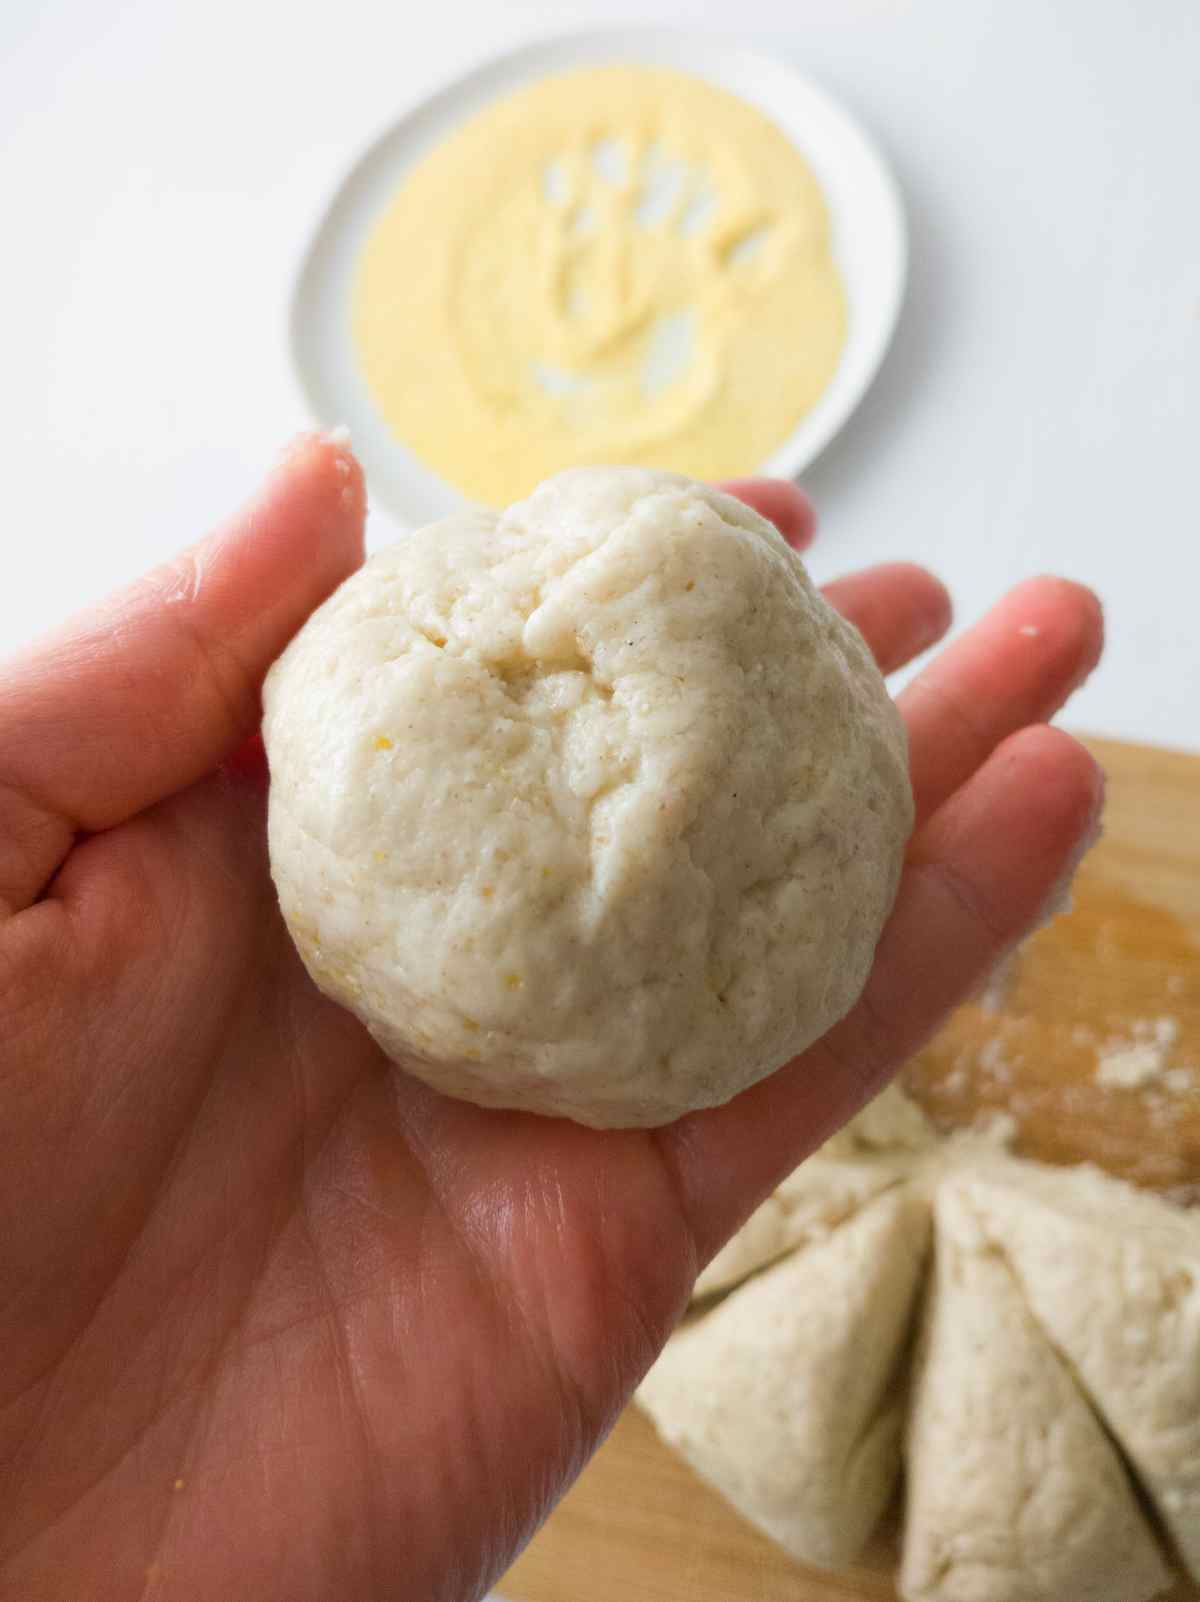 English muffins shaped into a ball held by a hand.